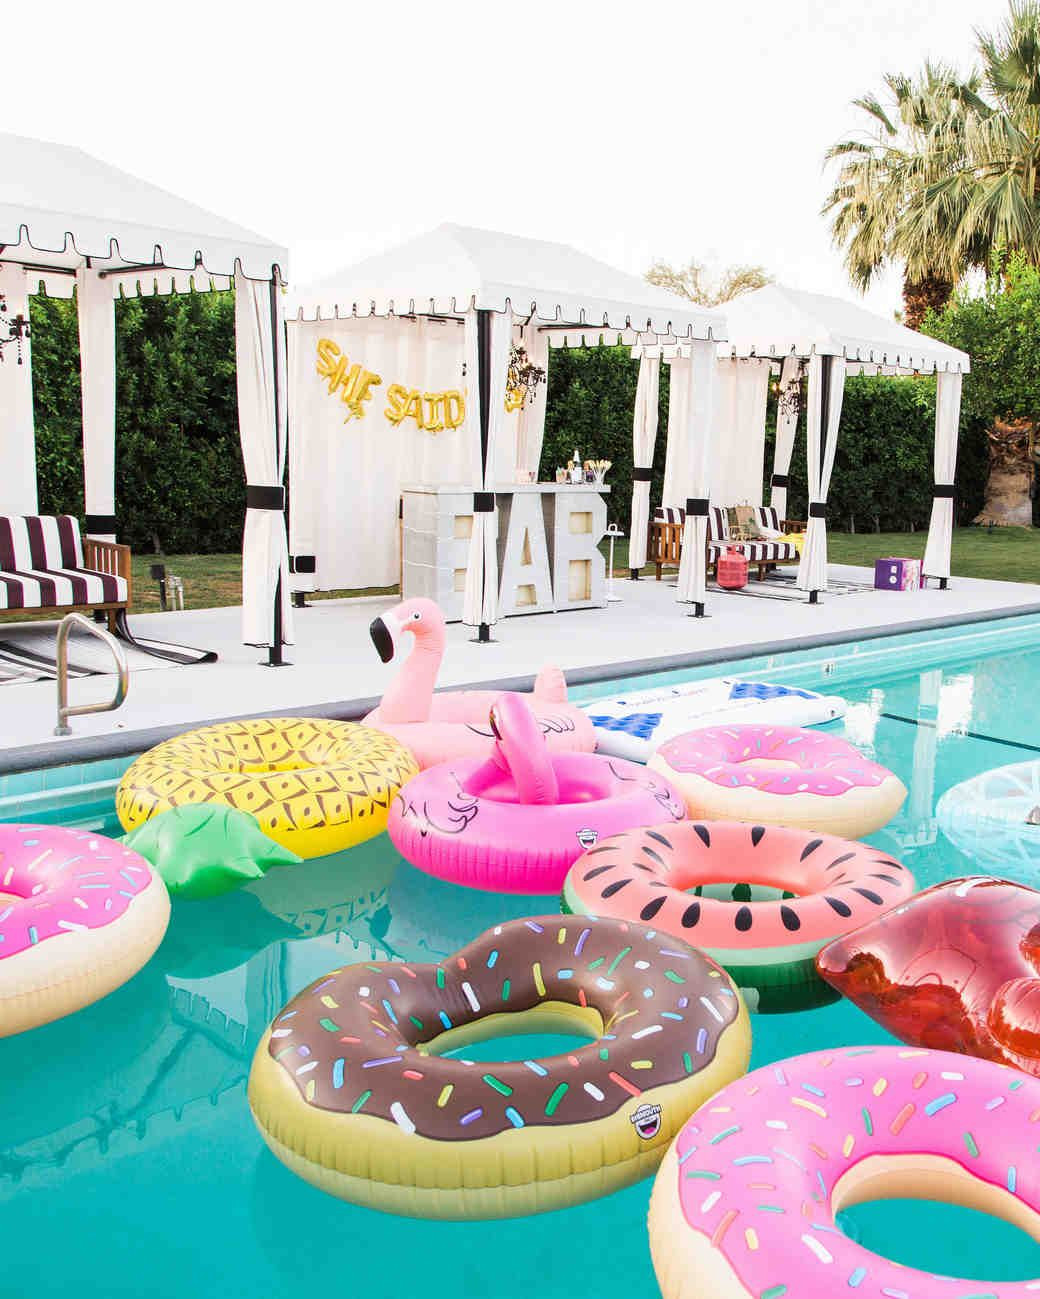 Poolside Party Decoration Ideas
 Creative Bachelorette Party Decoration Ideas